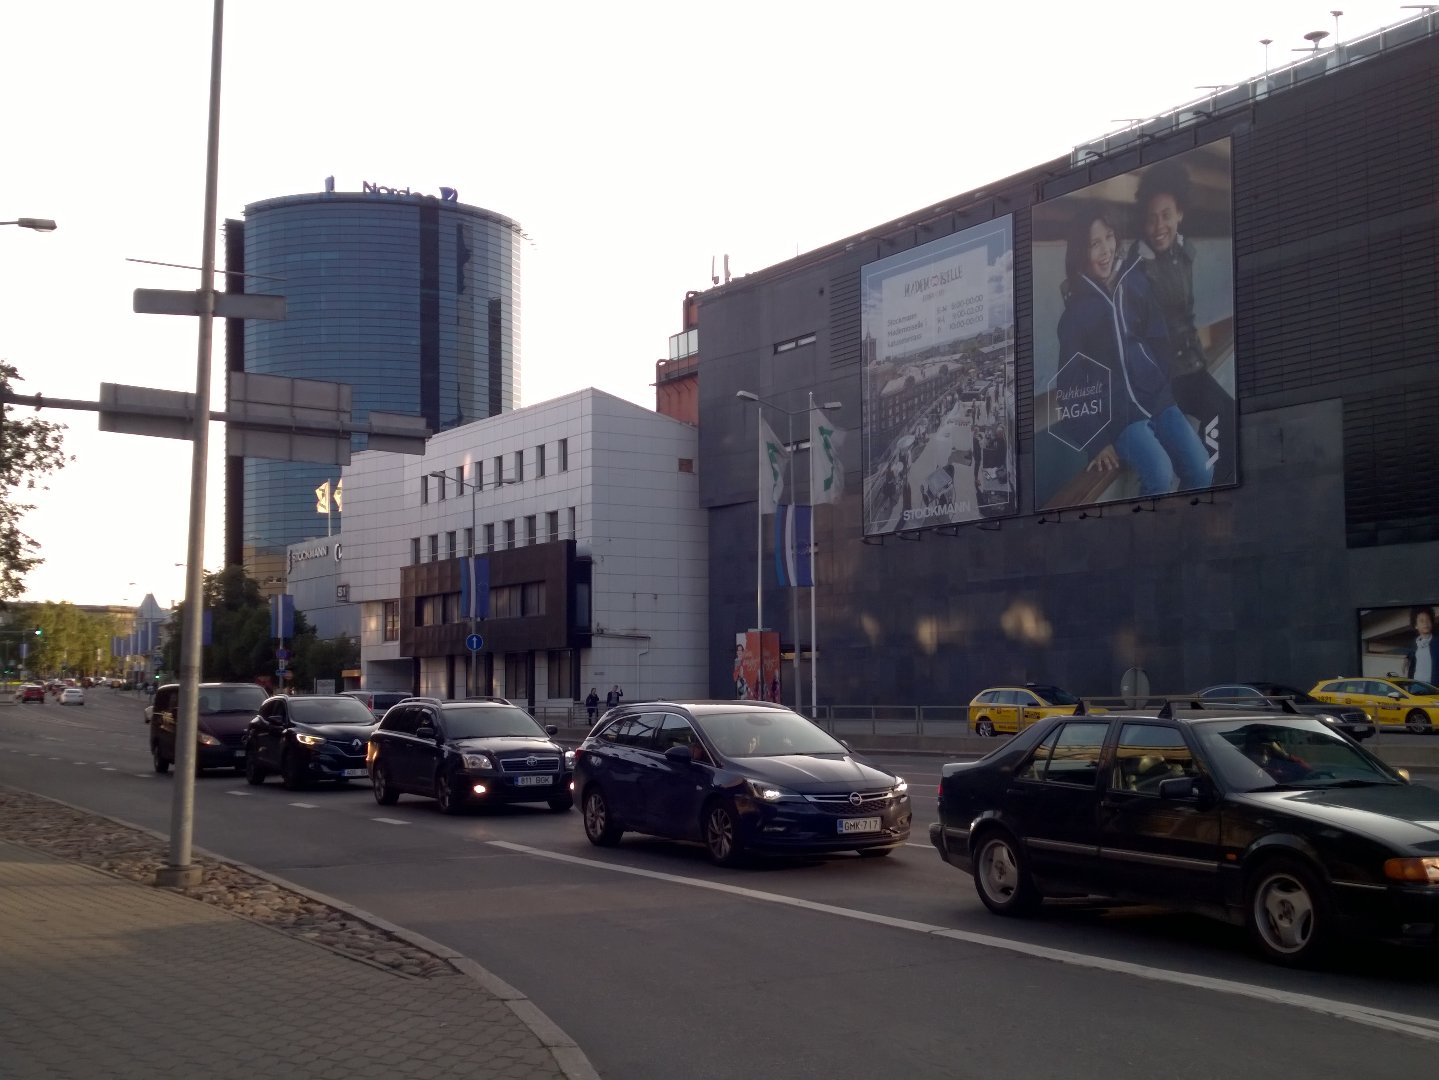 Liivalaia Street - Olympia Hotel and Stockmann's shopping mall rephoto